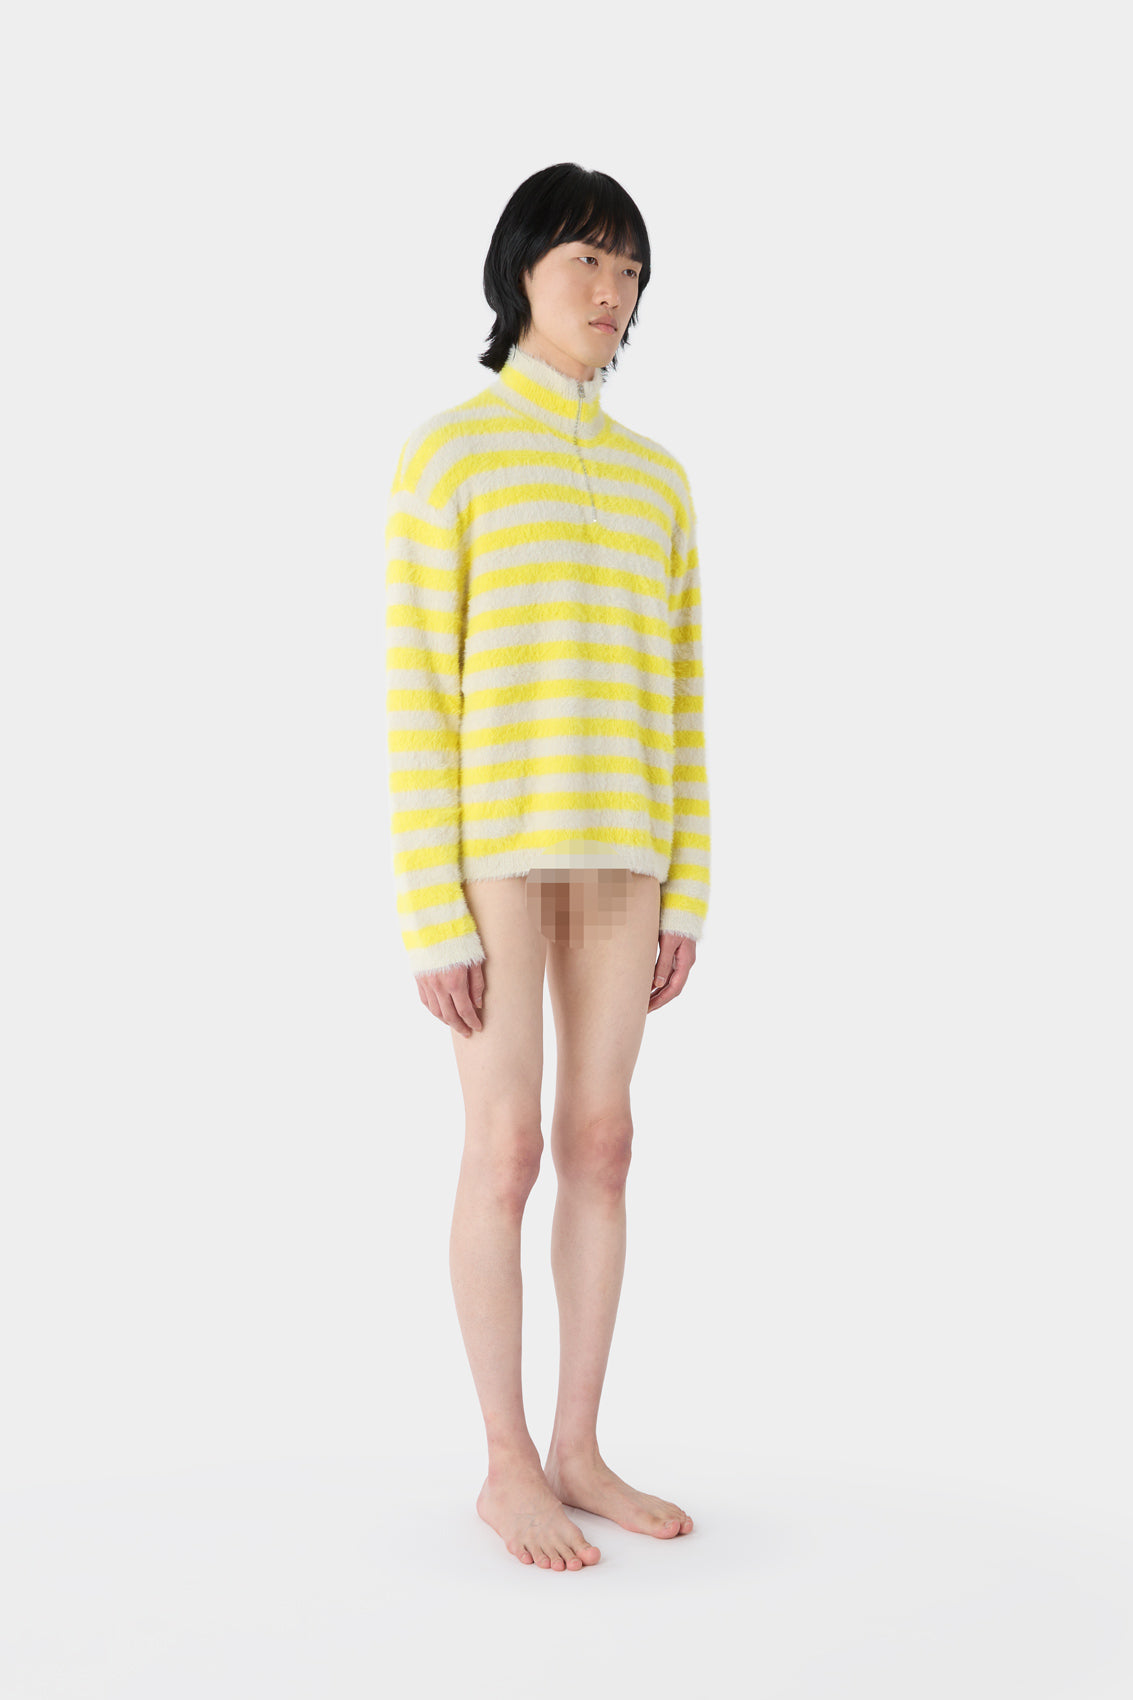 HIGH NECK FLUFFY LOGNG SLEEVE / beige & yellow stripes